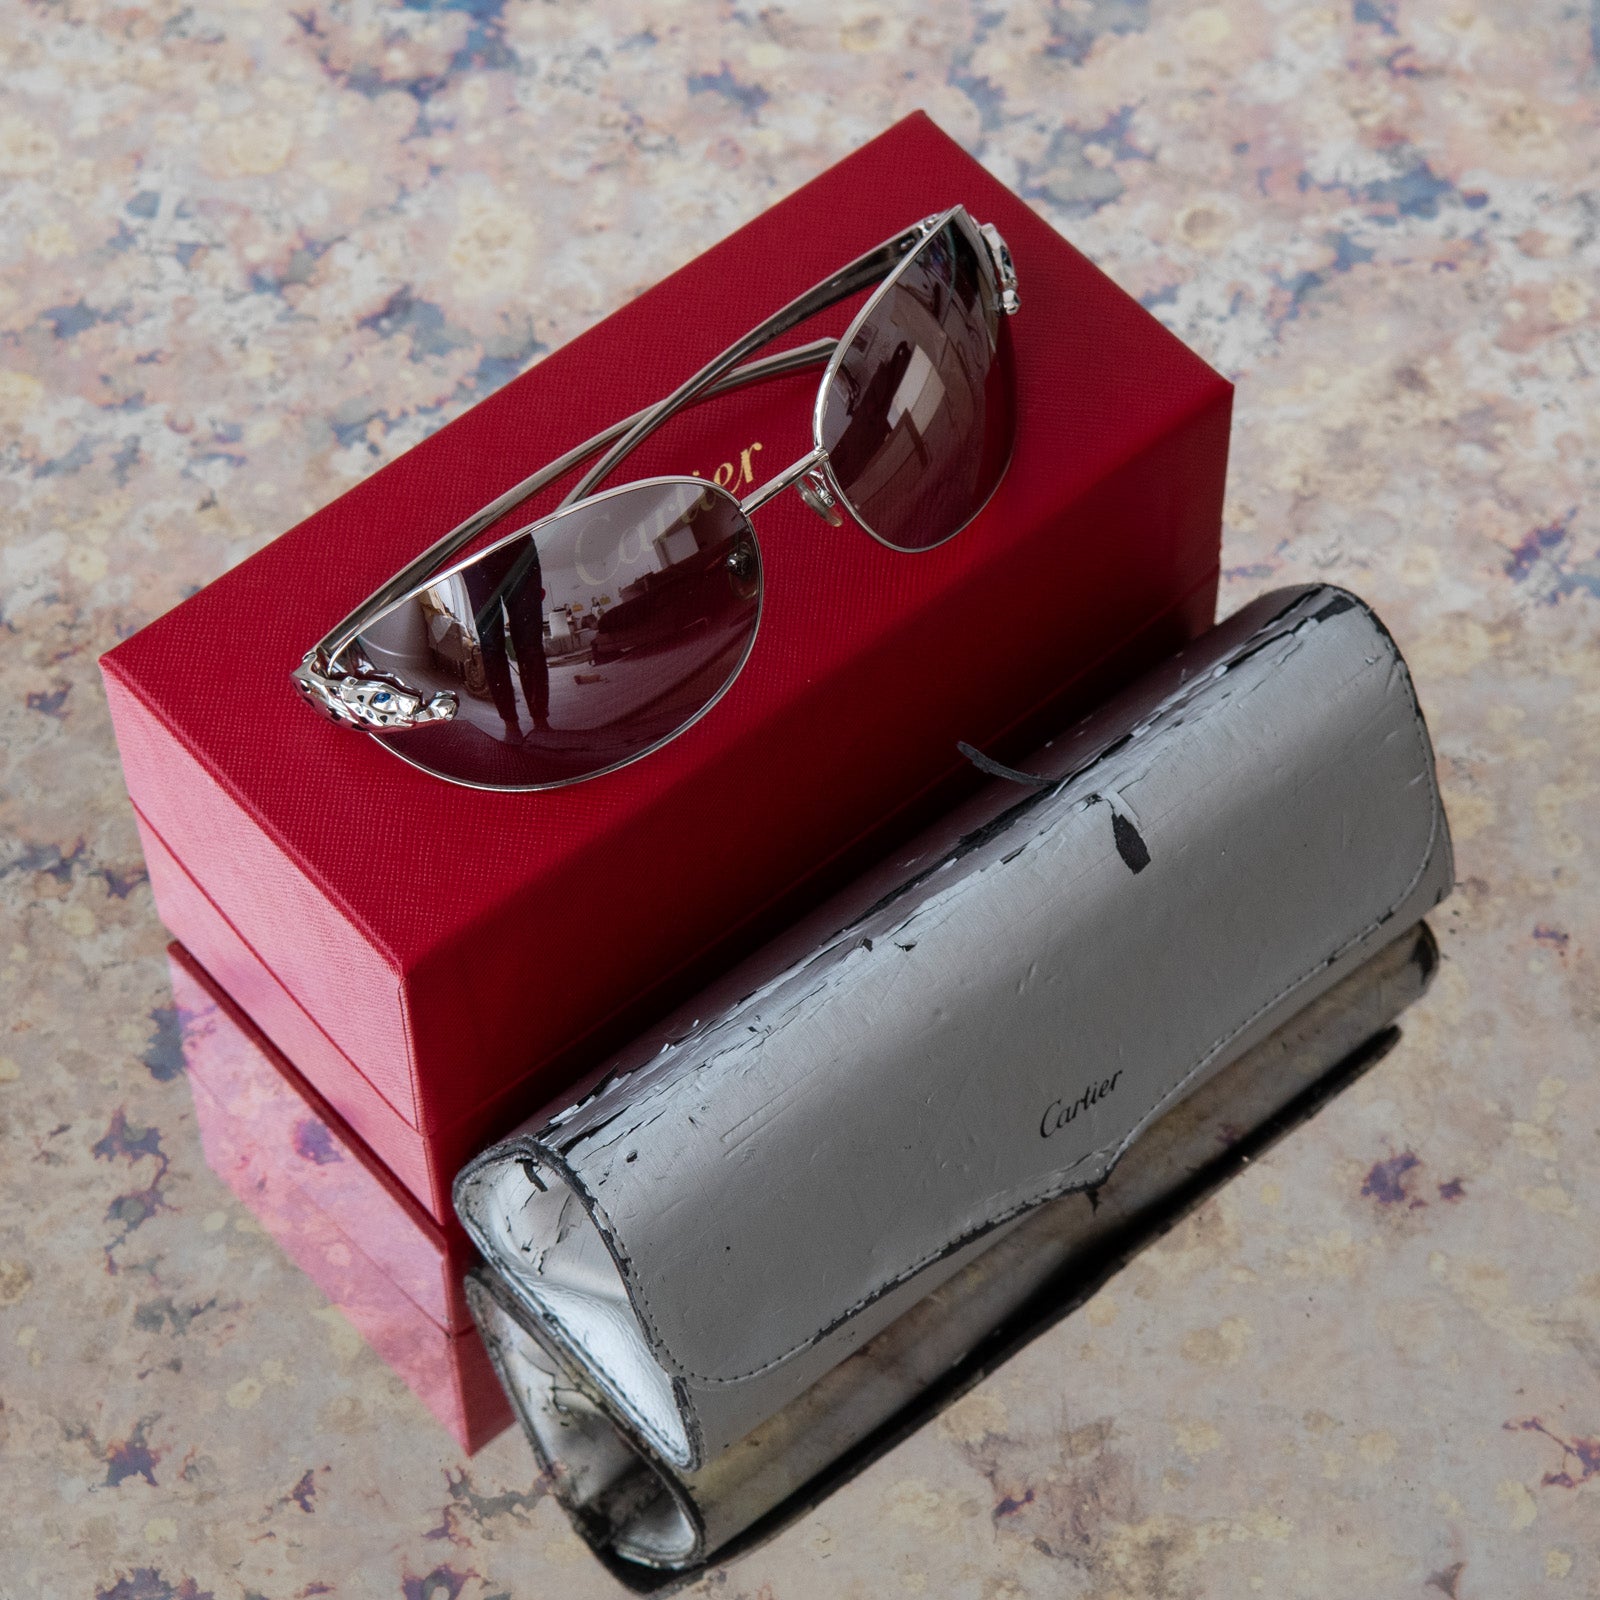 Cartier Vintage Limited Edition Panthere de Aviator Sunglasses - Image 3 of 8